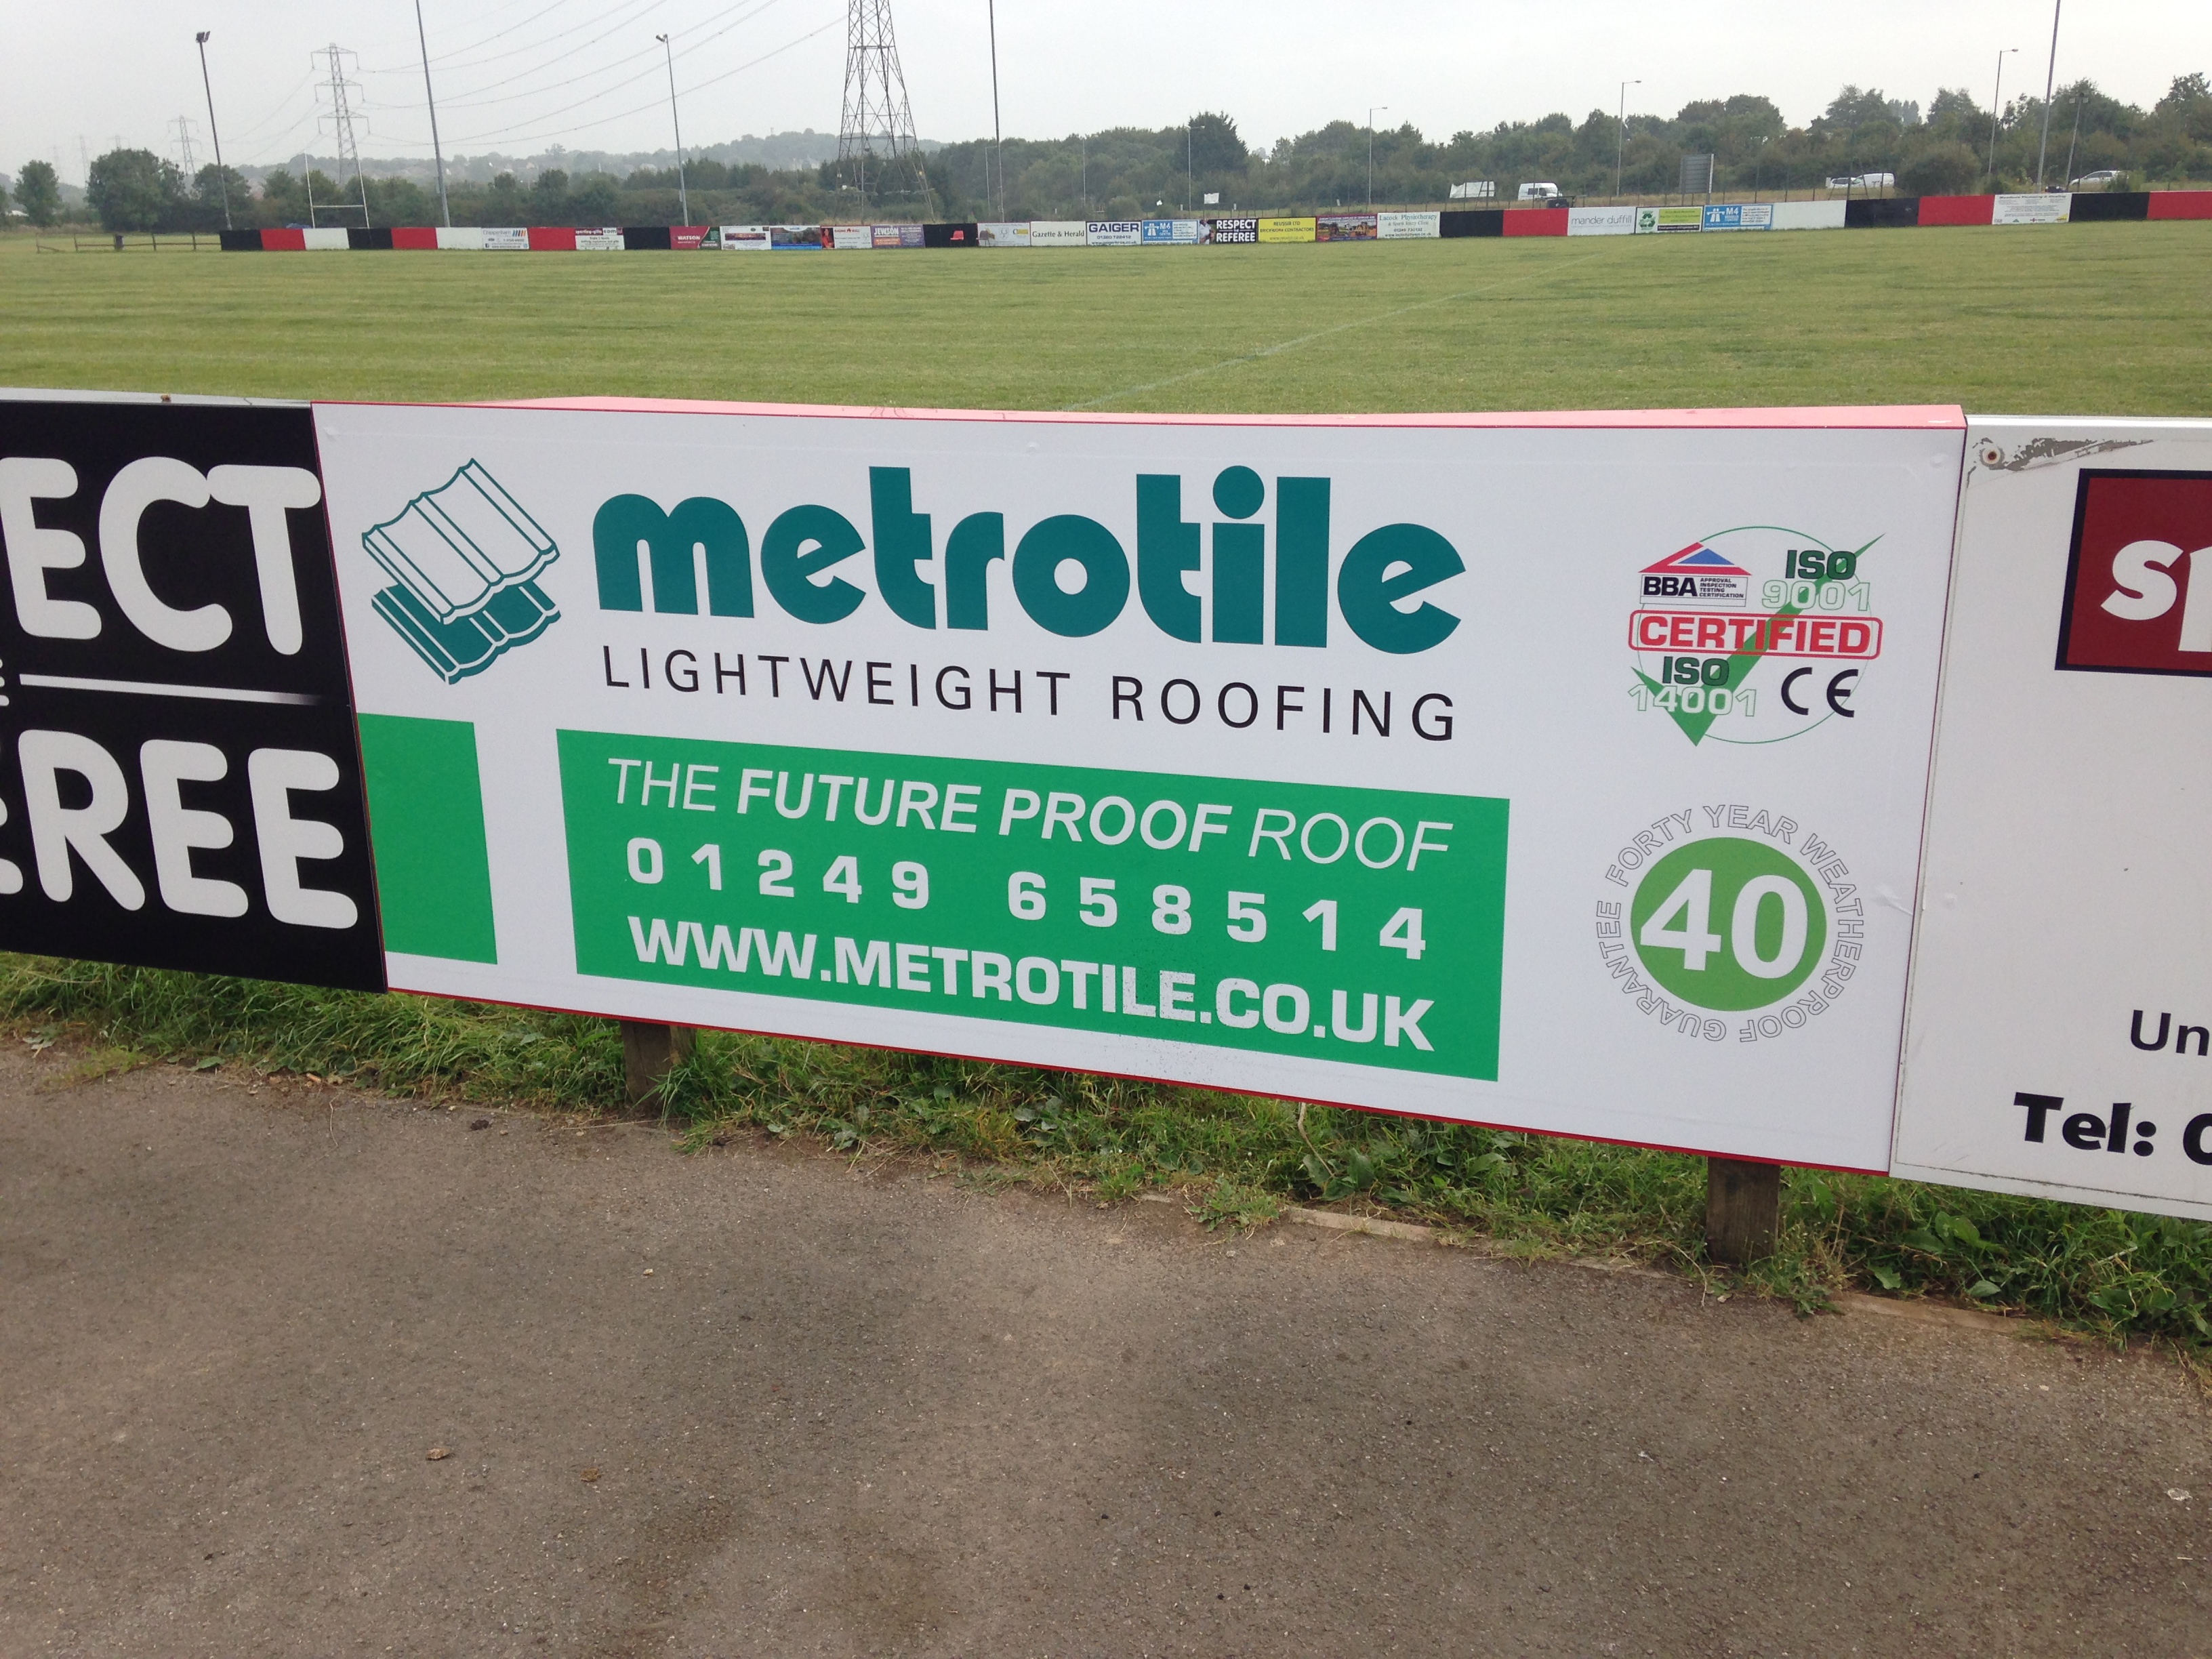 Metrotile Lightweight Roofing Rugby Ground Ad